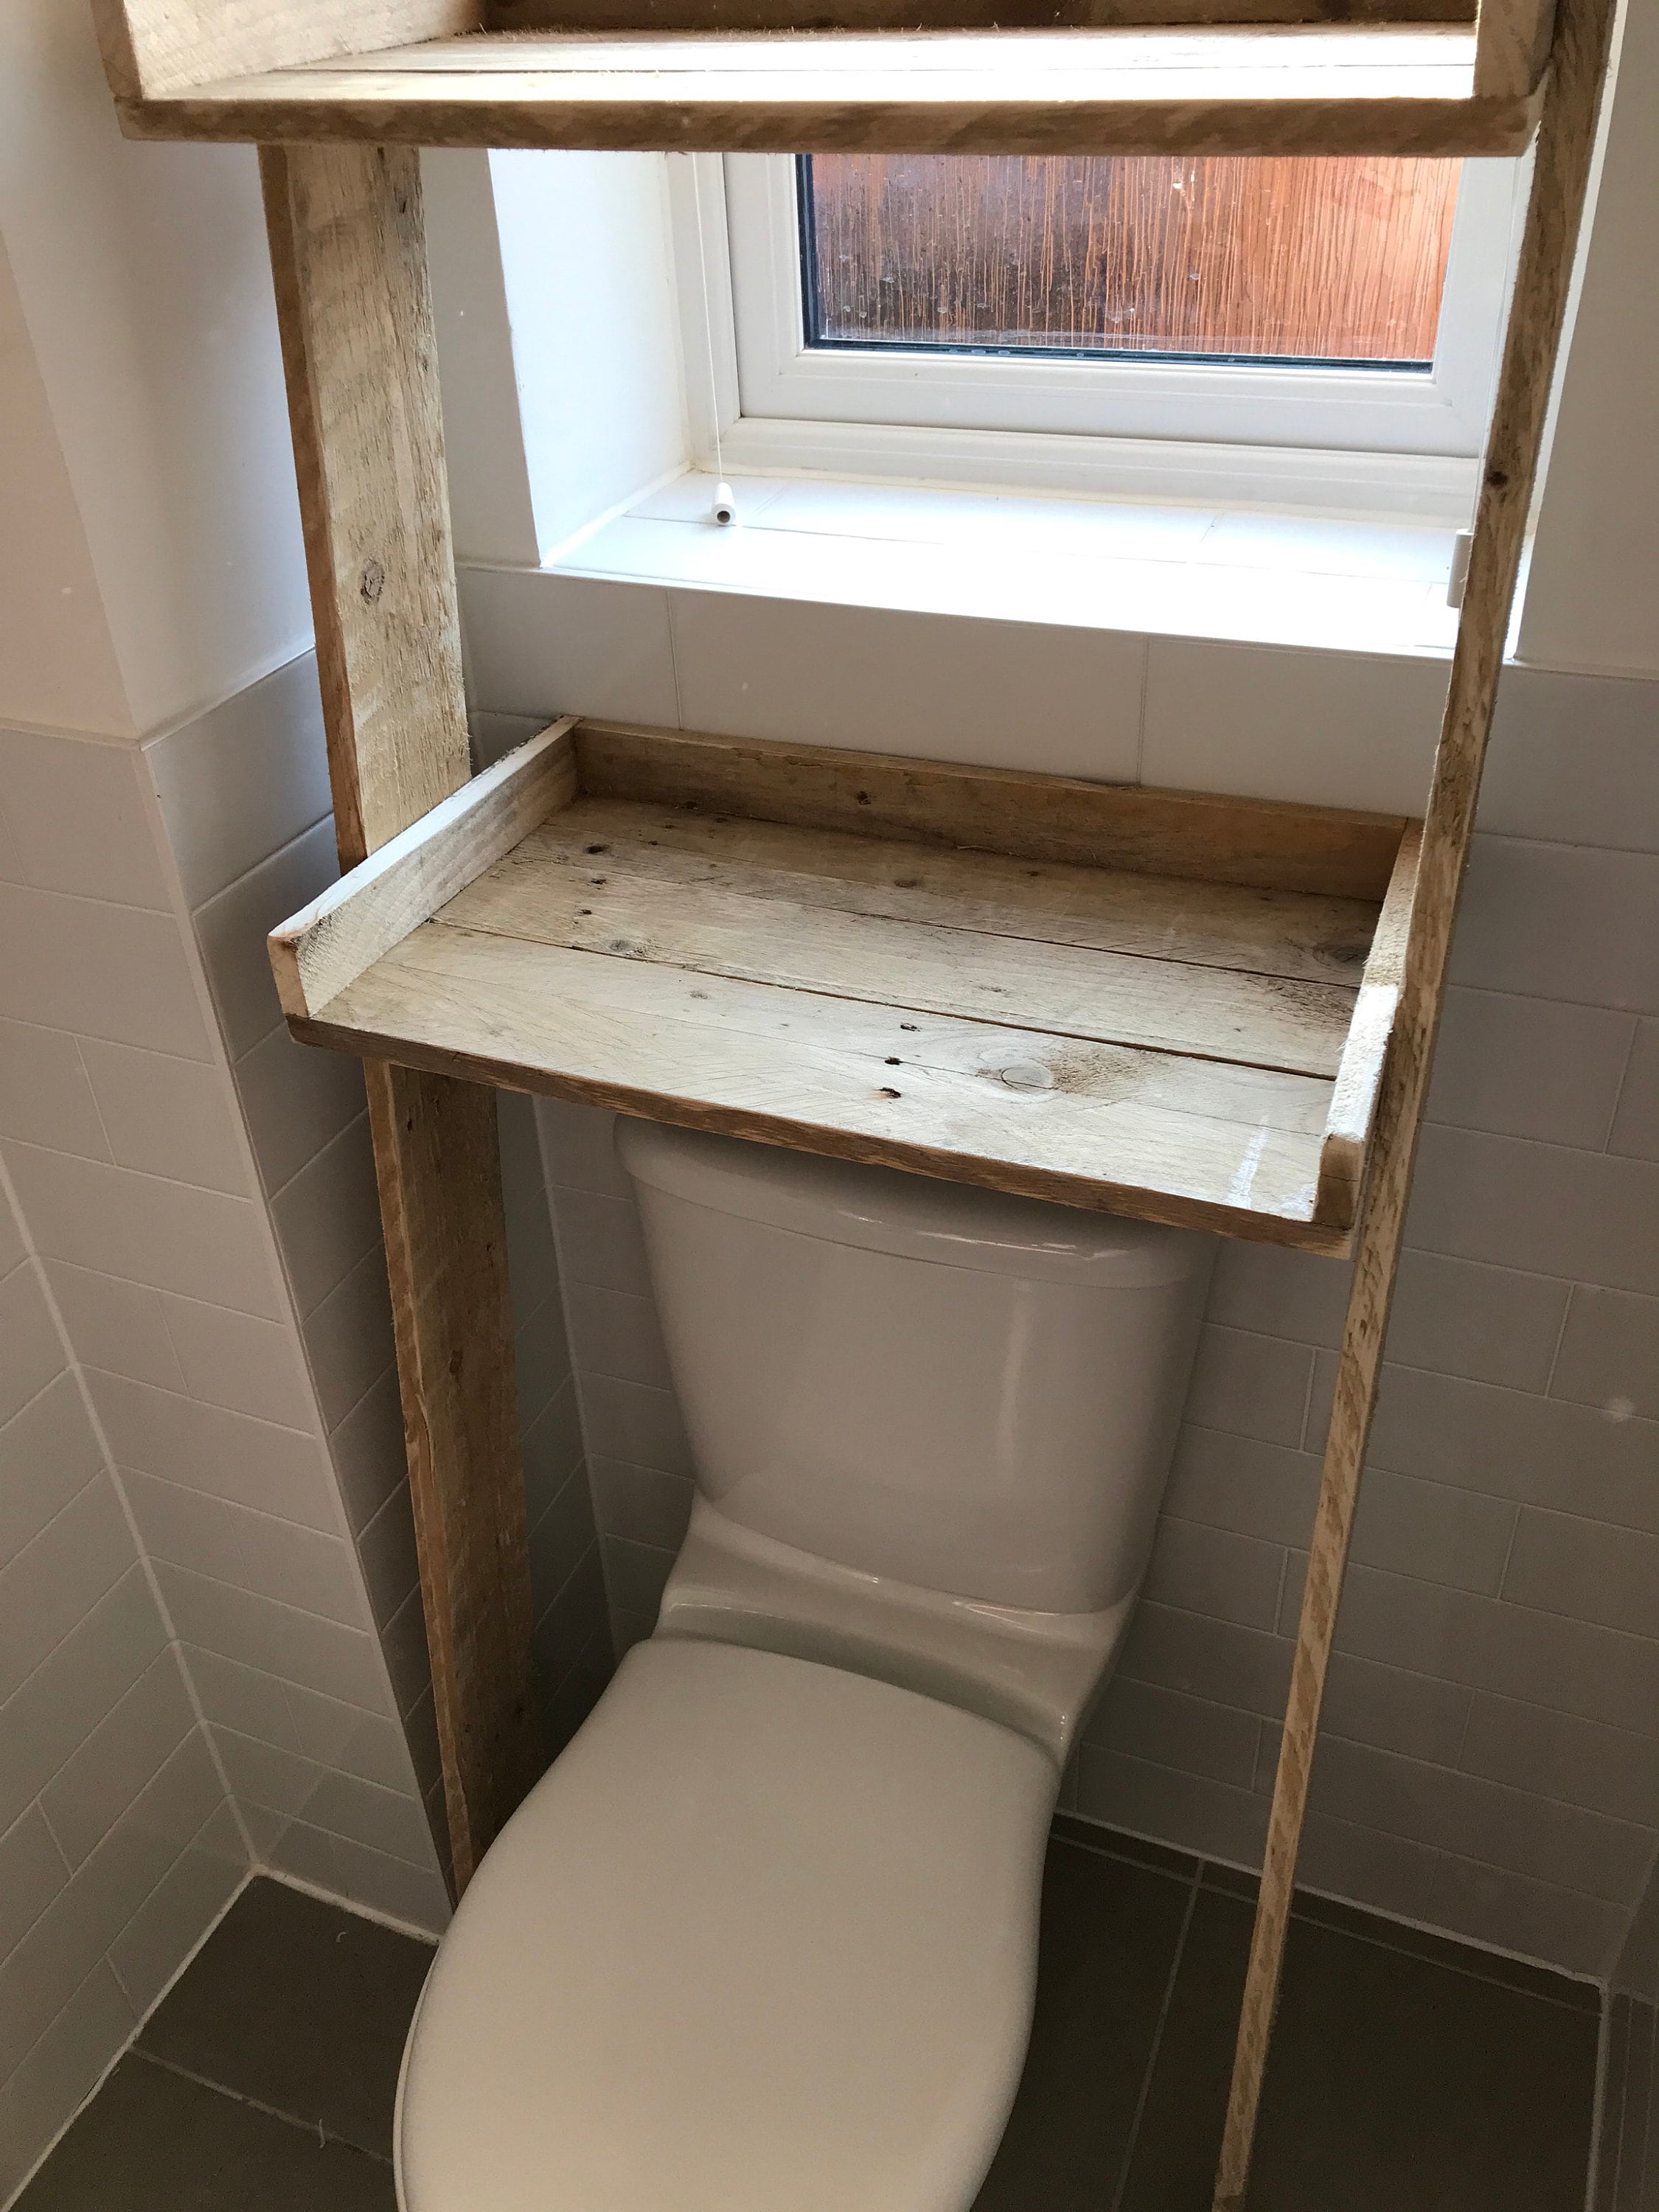 Over the Toilet Ladder Shelf Made From Reclaimed Pallet Wood ...